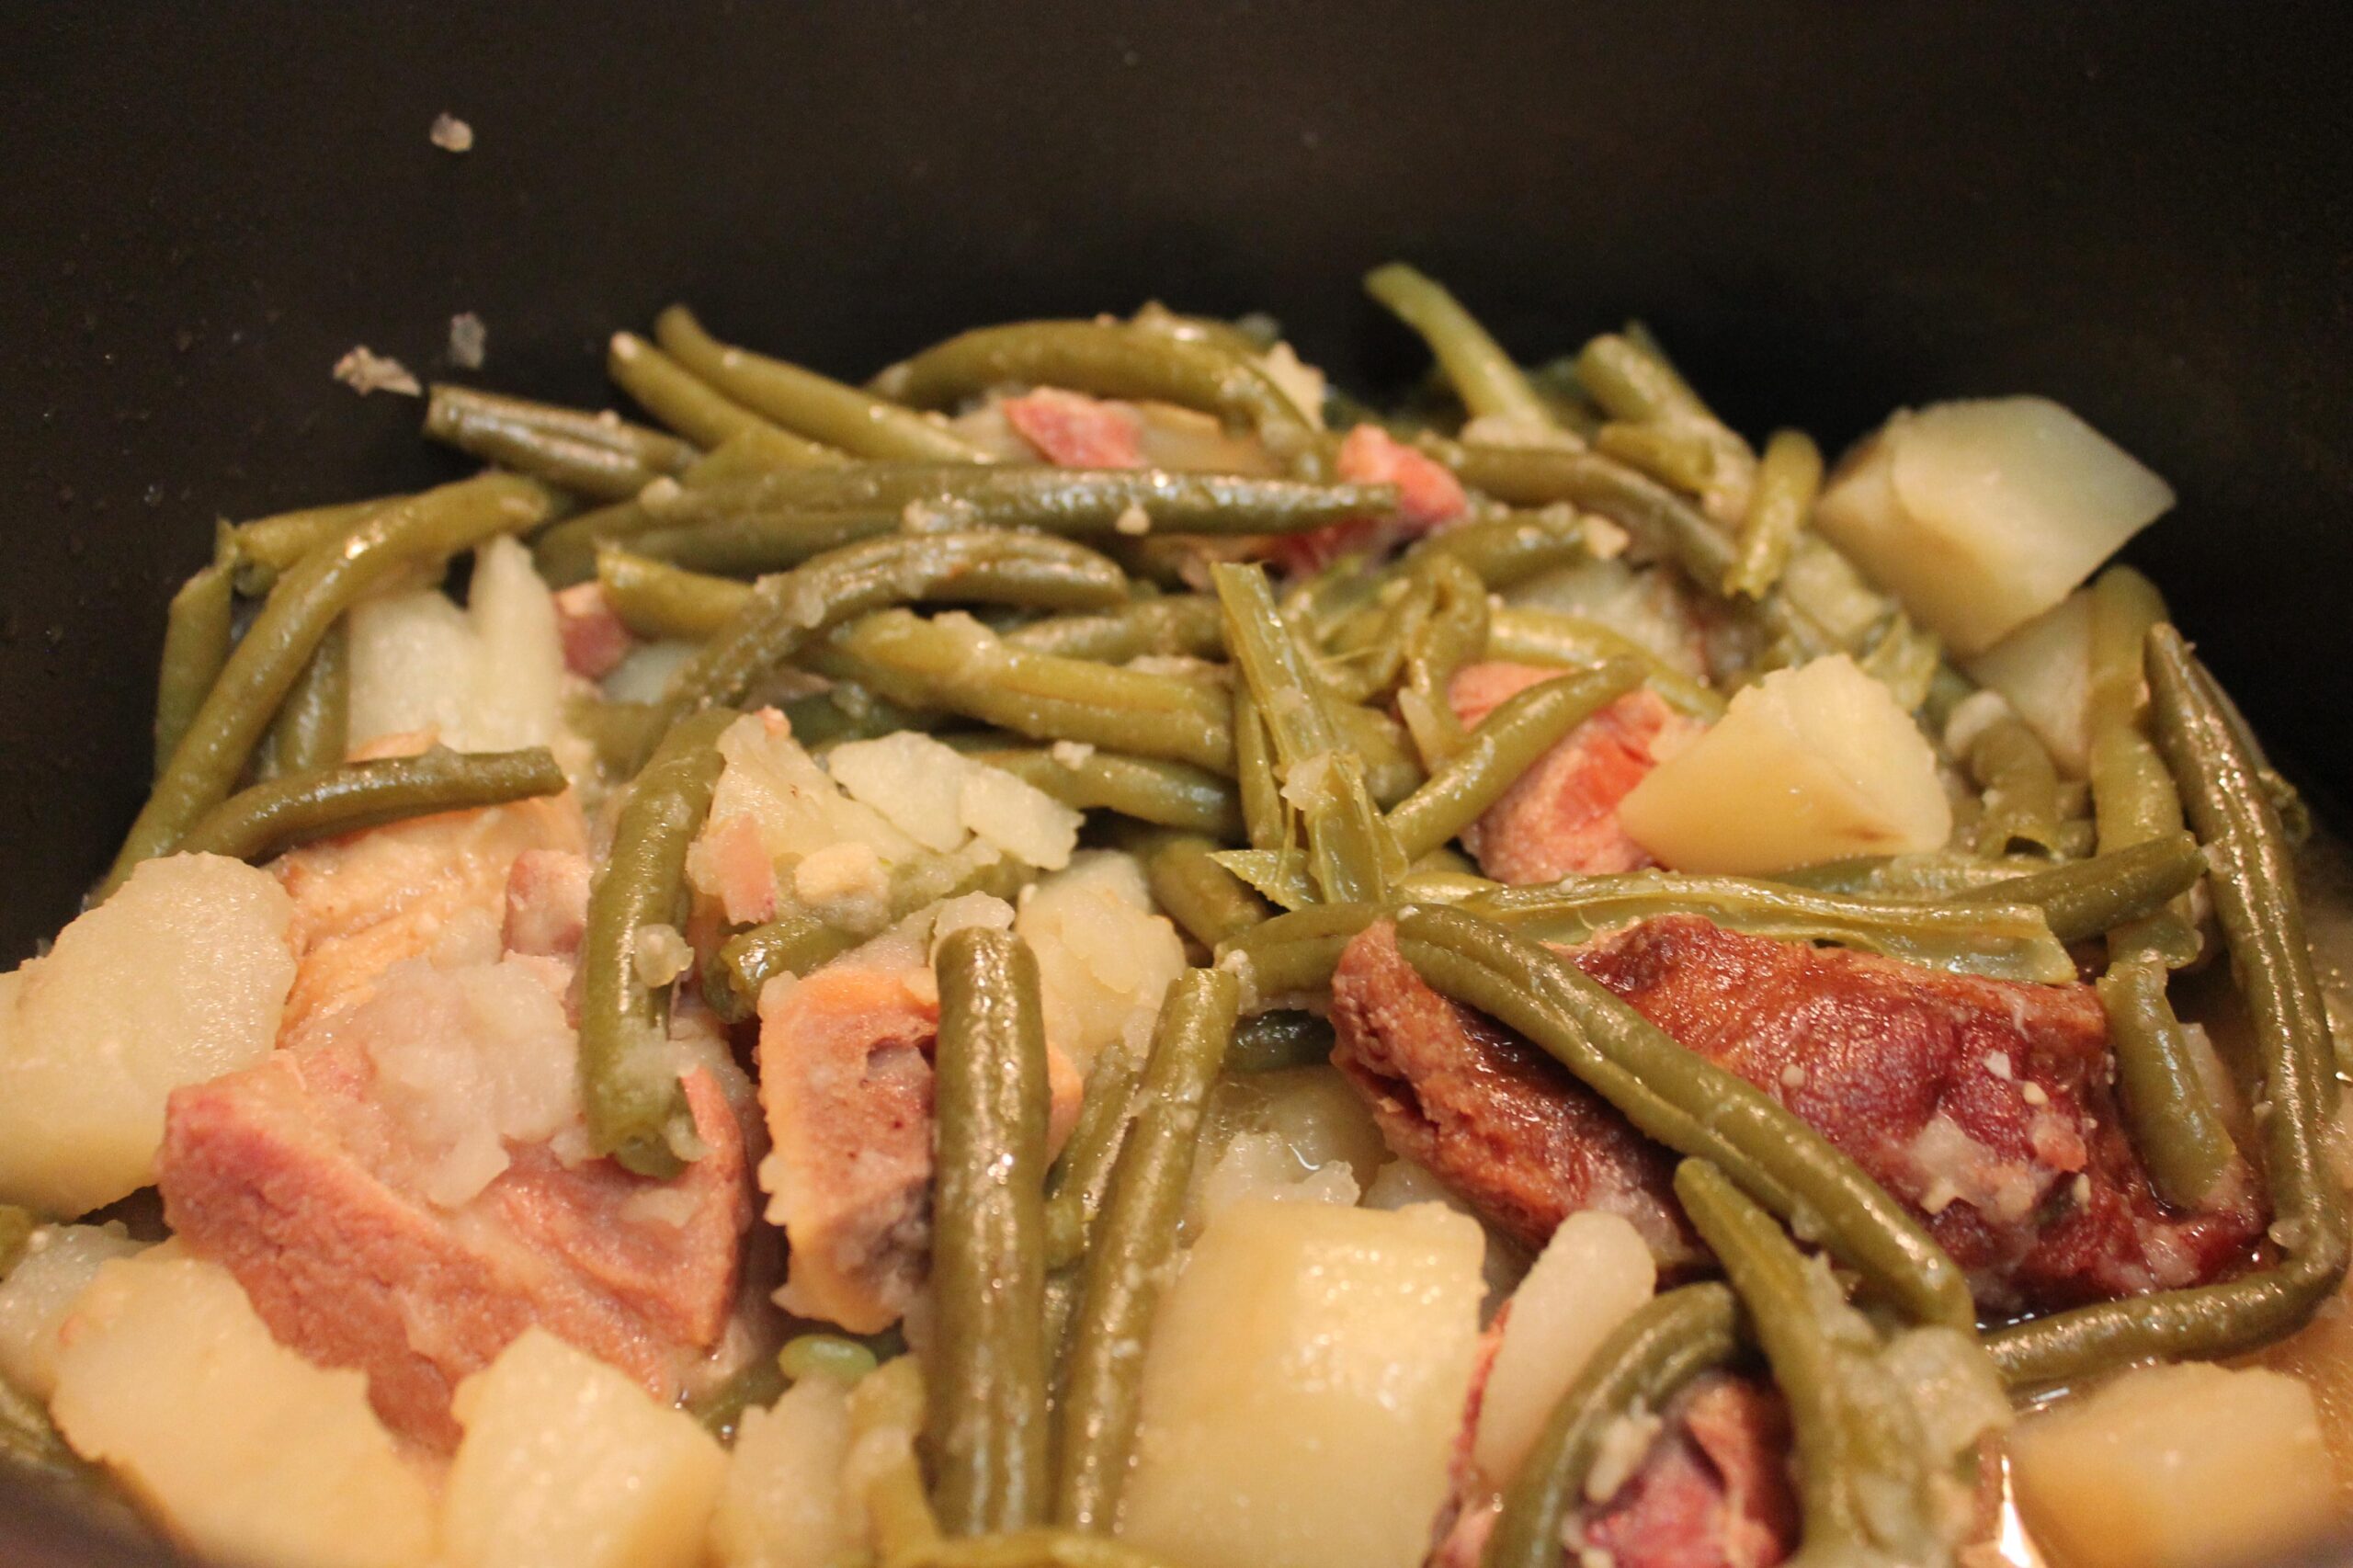  A classic southern recipe that never fails to delight the taste buds.